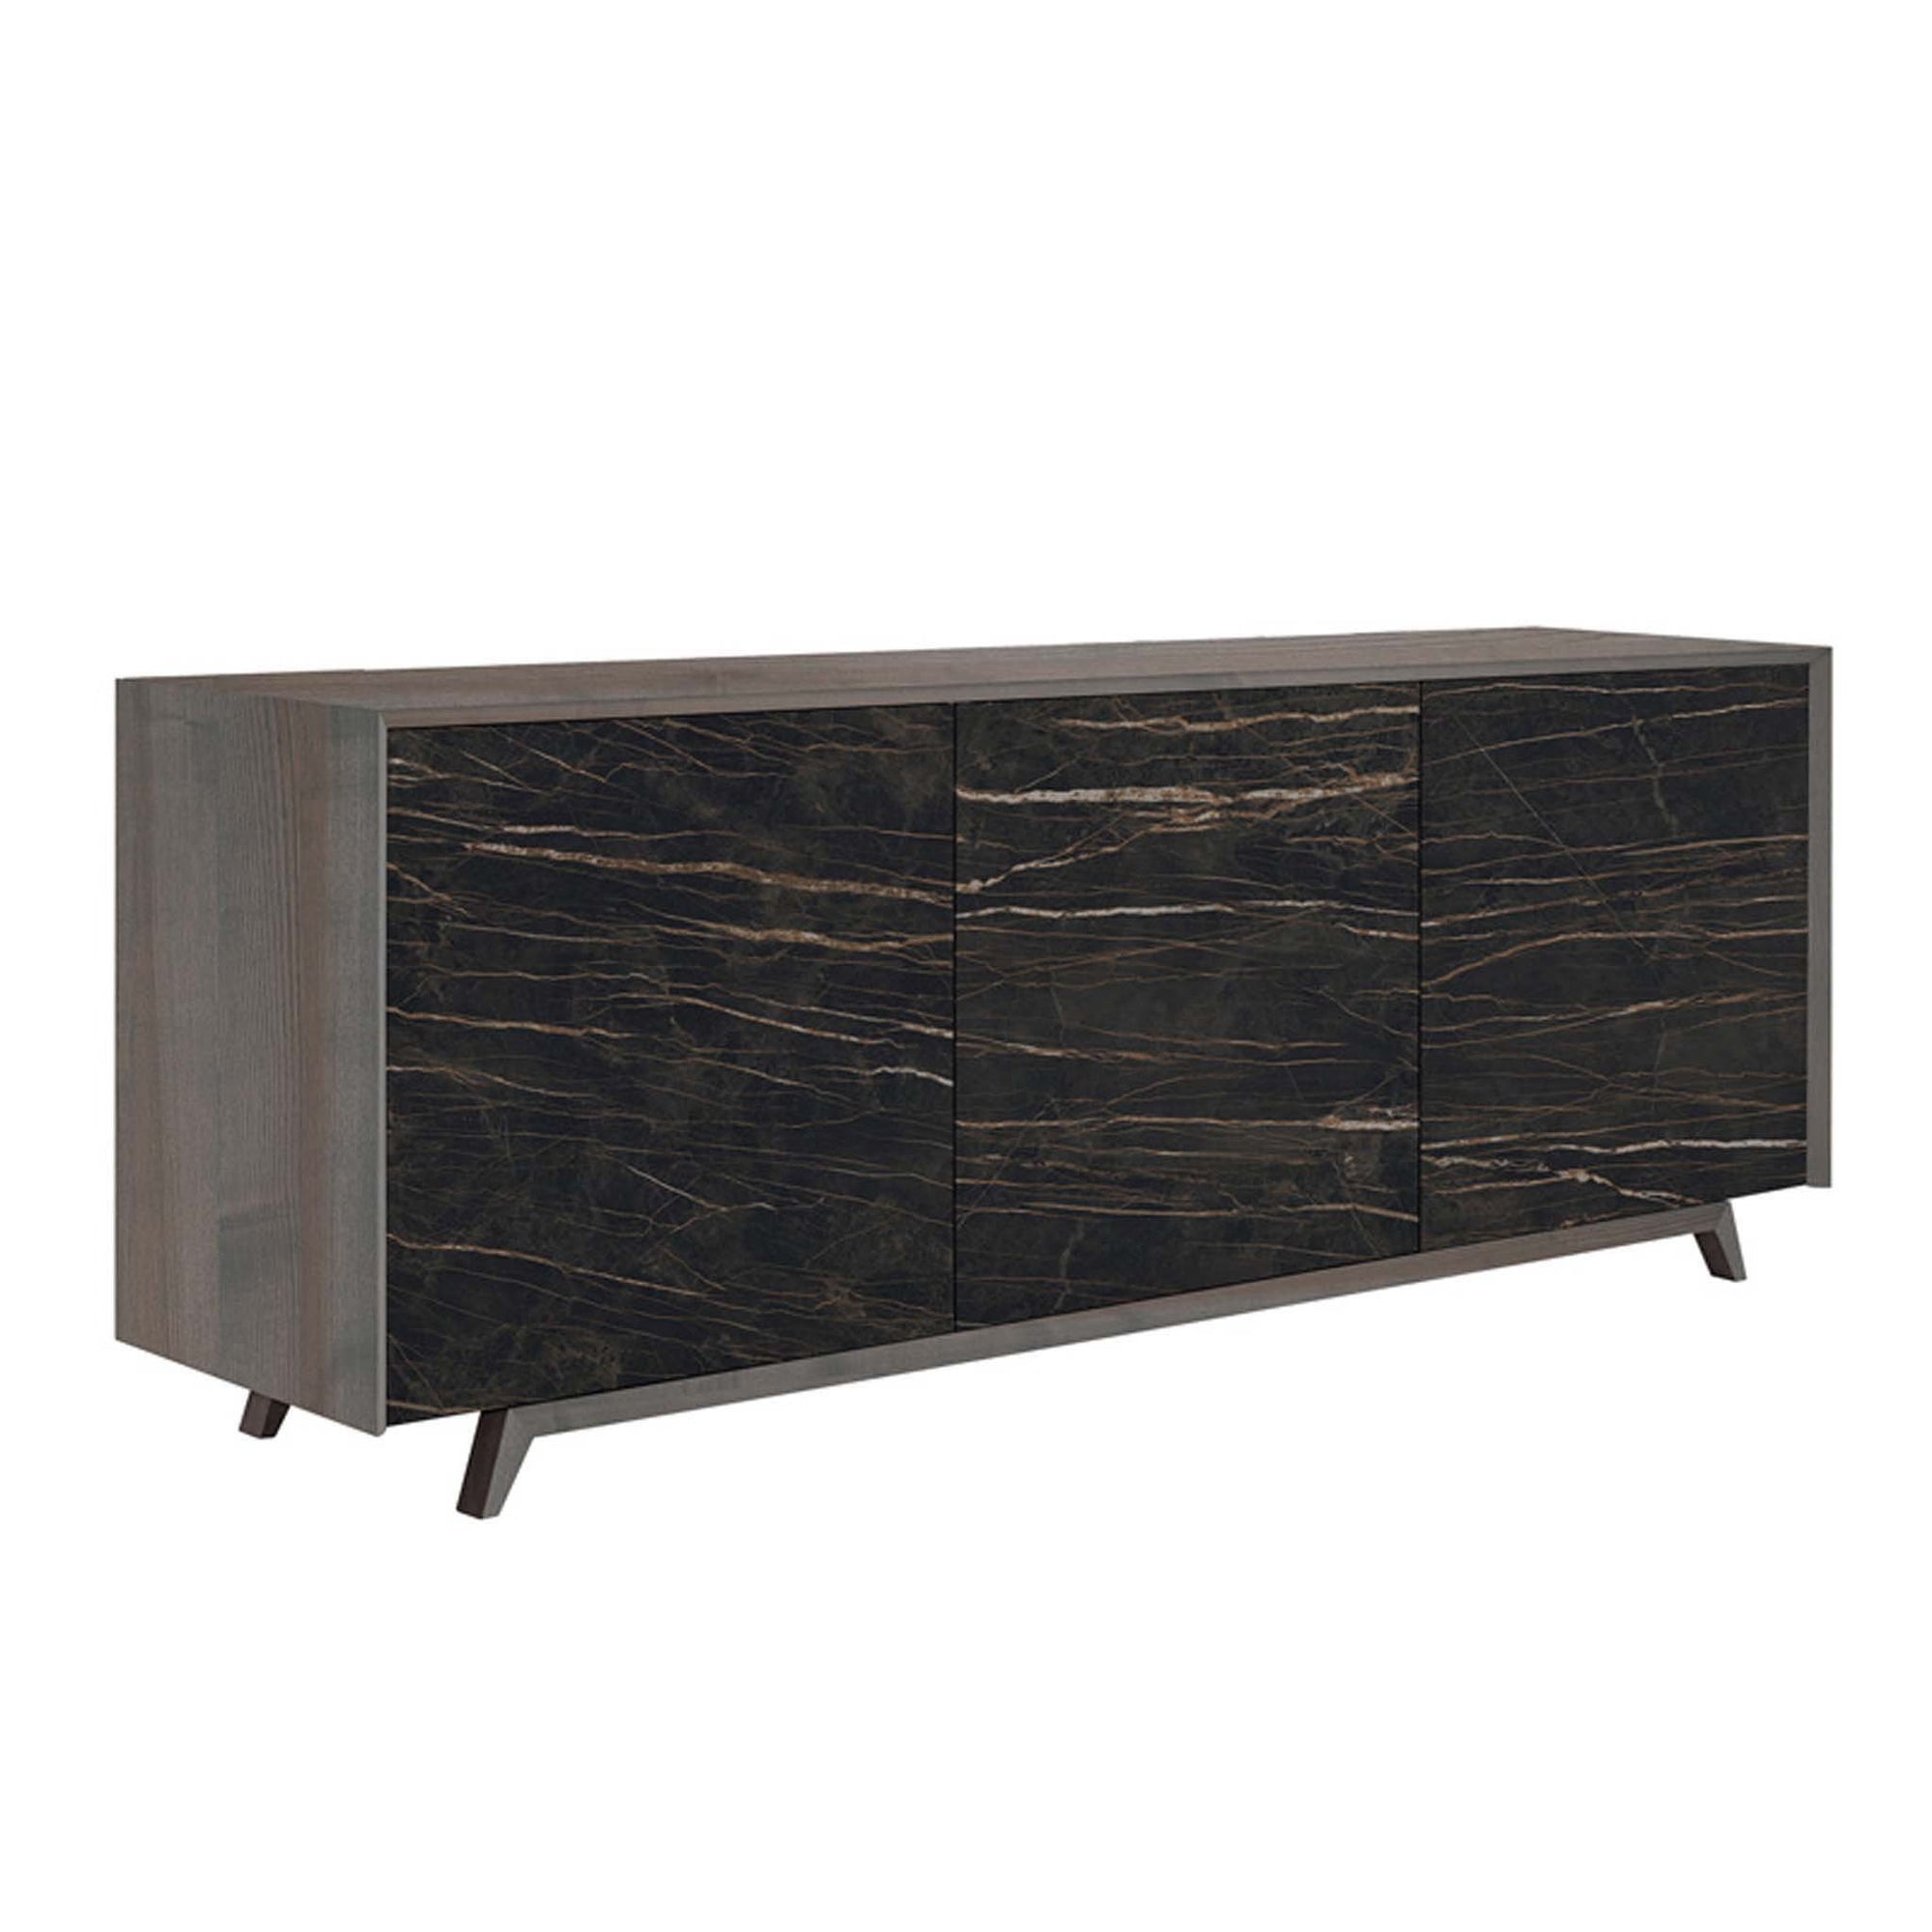 Bellini-Tischlein Sideboard with Ash Body and Noir Desir Ceramic Doors-Sideboards & Buffets-MODTEMPO